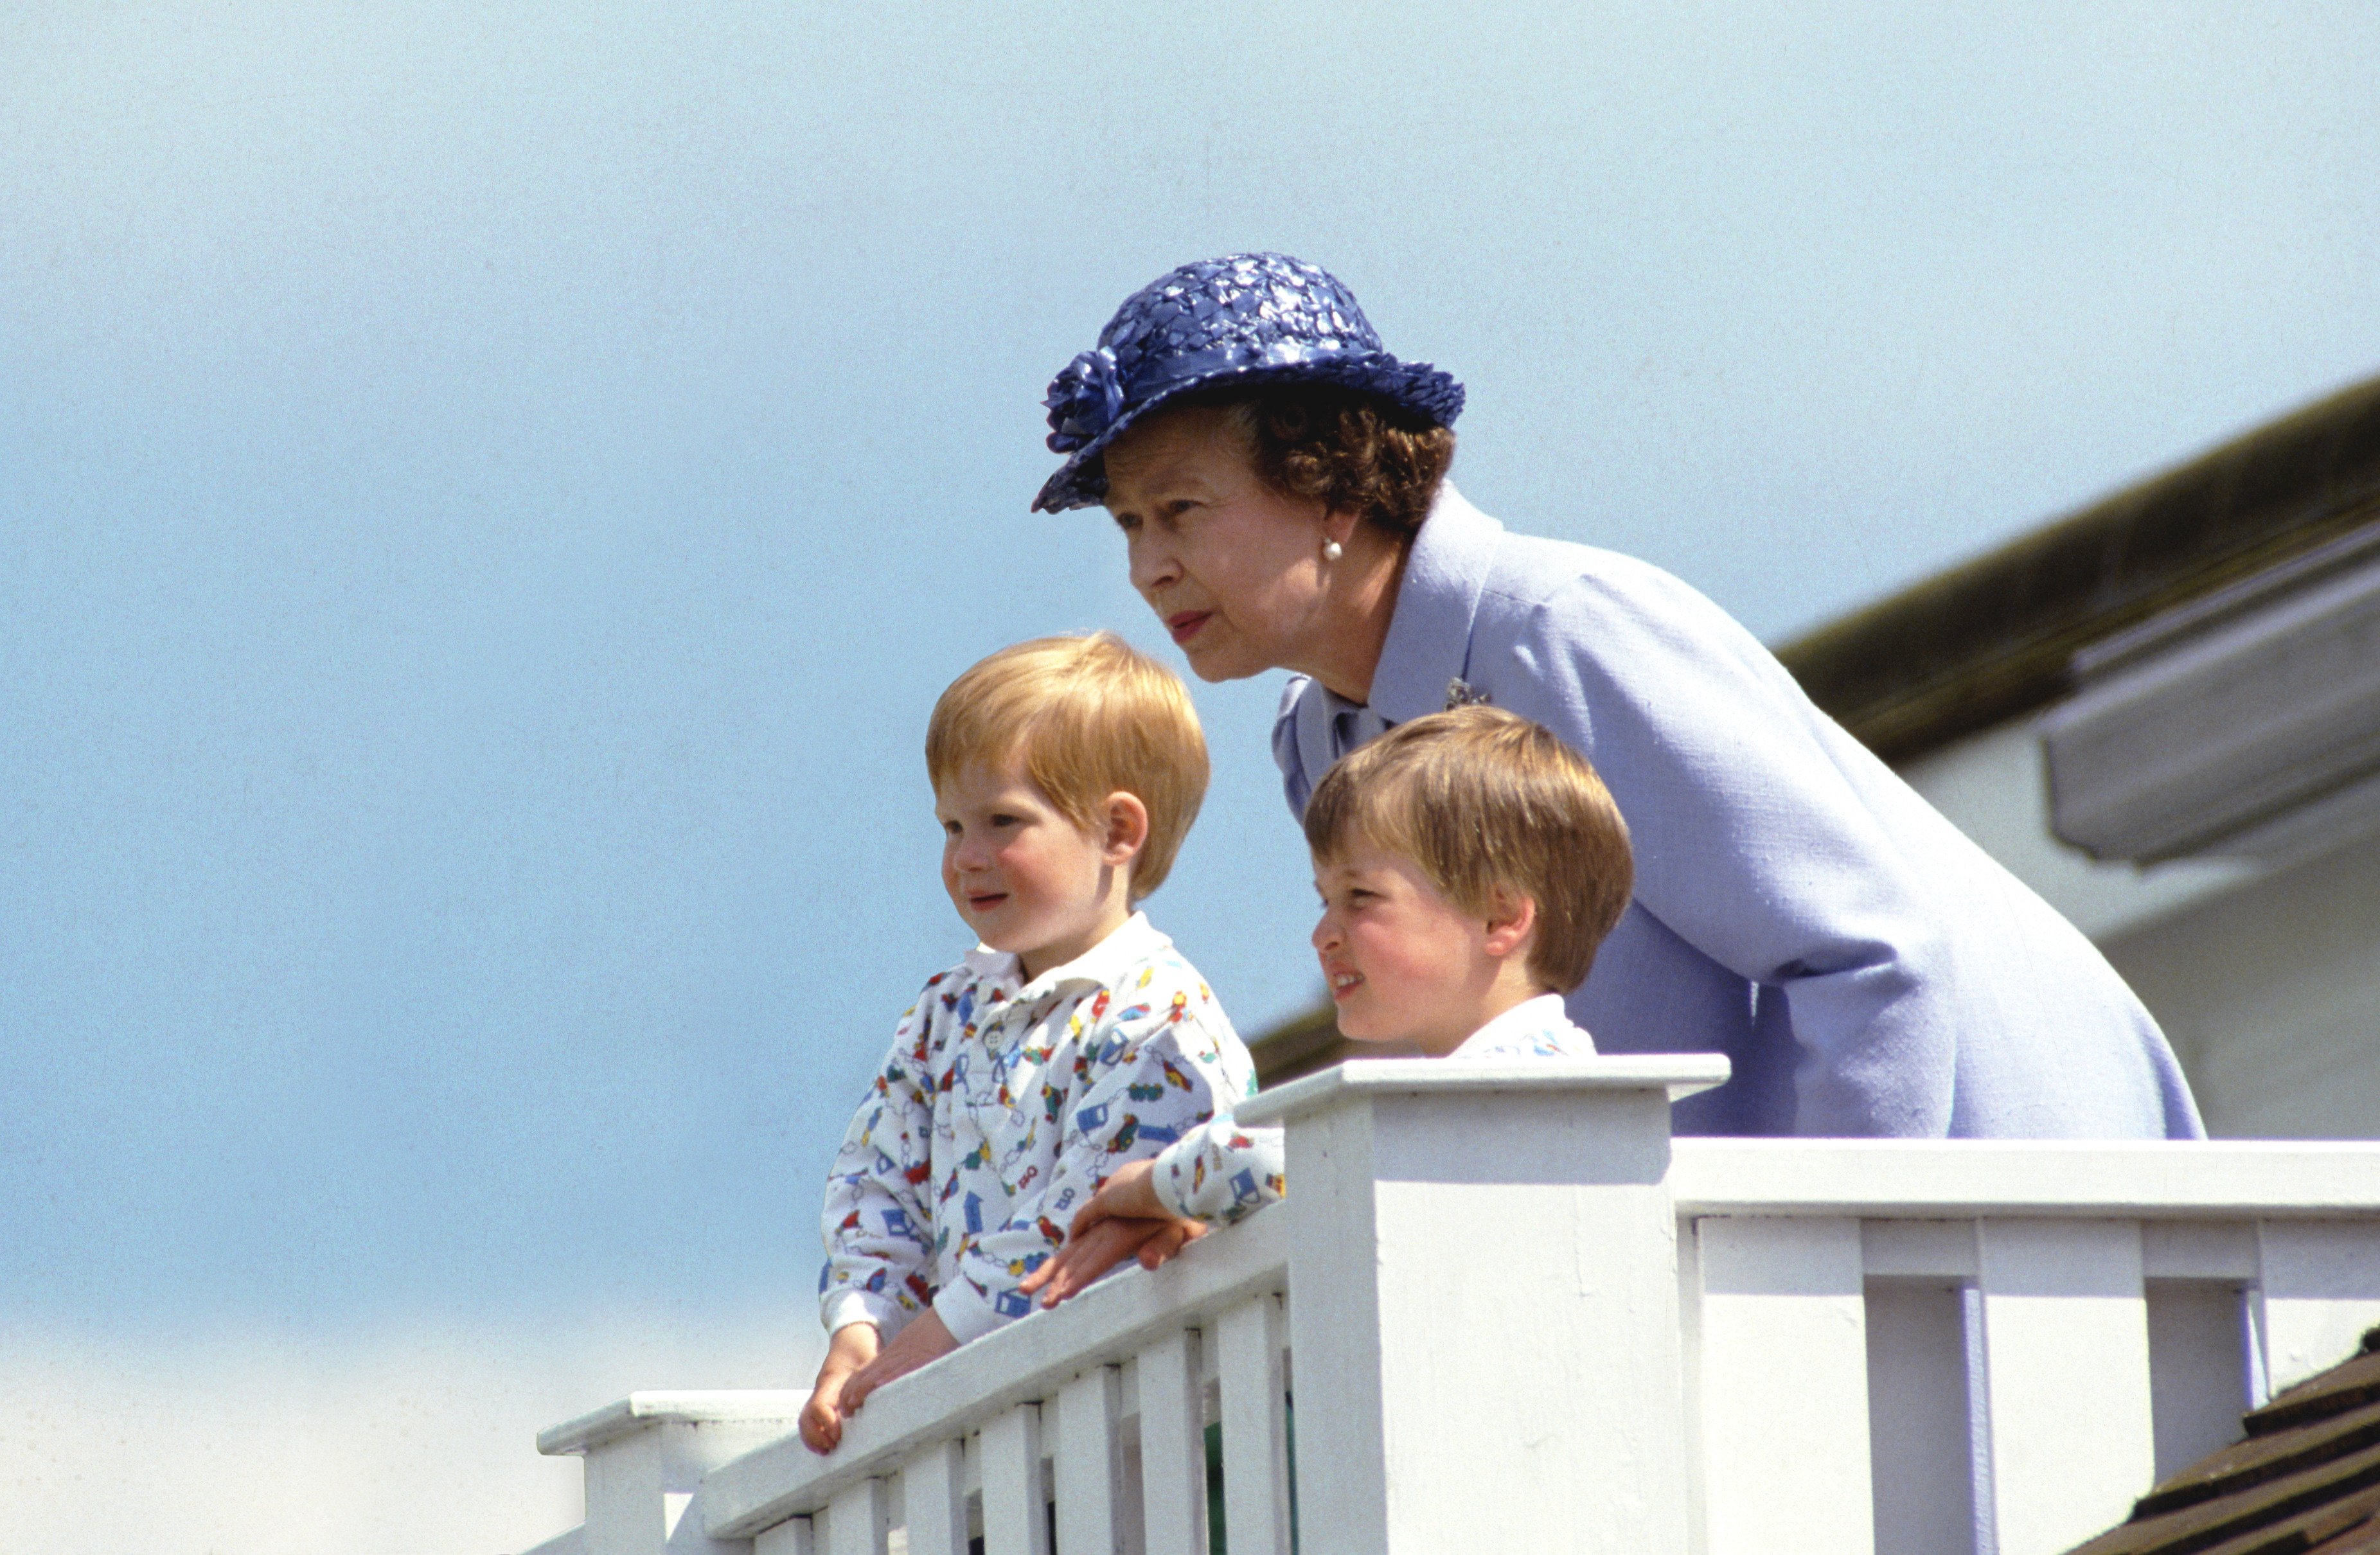 The Queen With Prince William And Prince Harry In The Royal Box At Guards Polo Club, Smiths Lawn, Windsor | Source: Getty Images